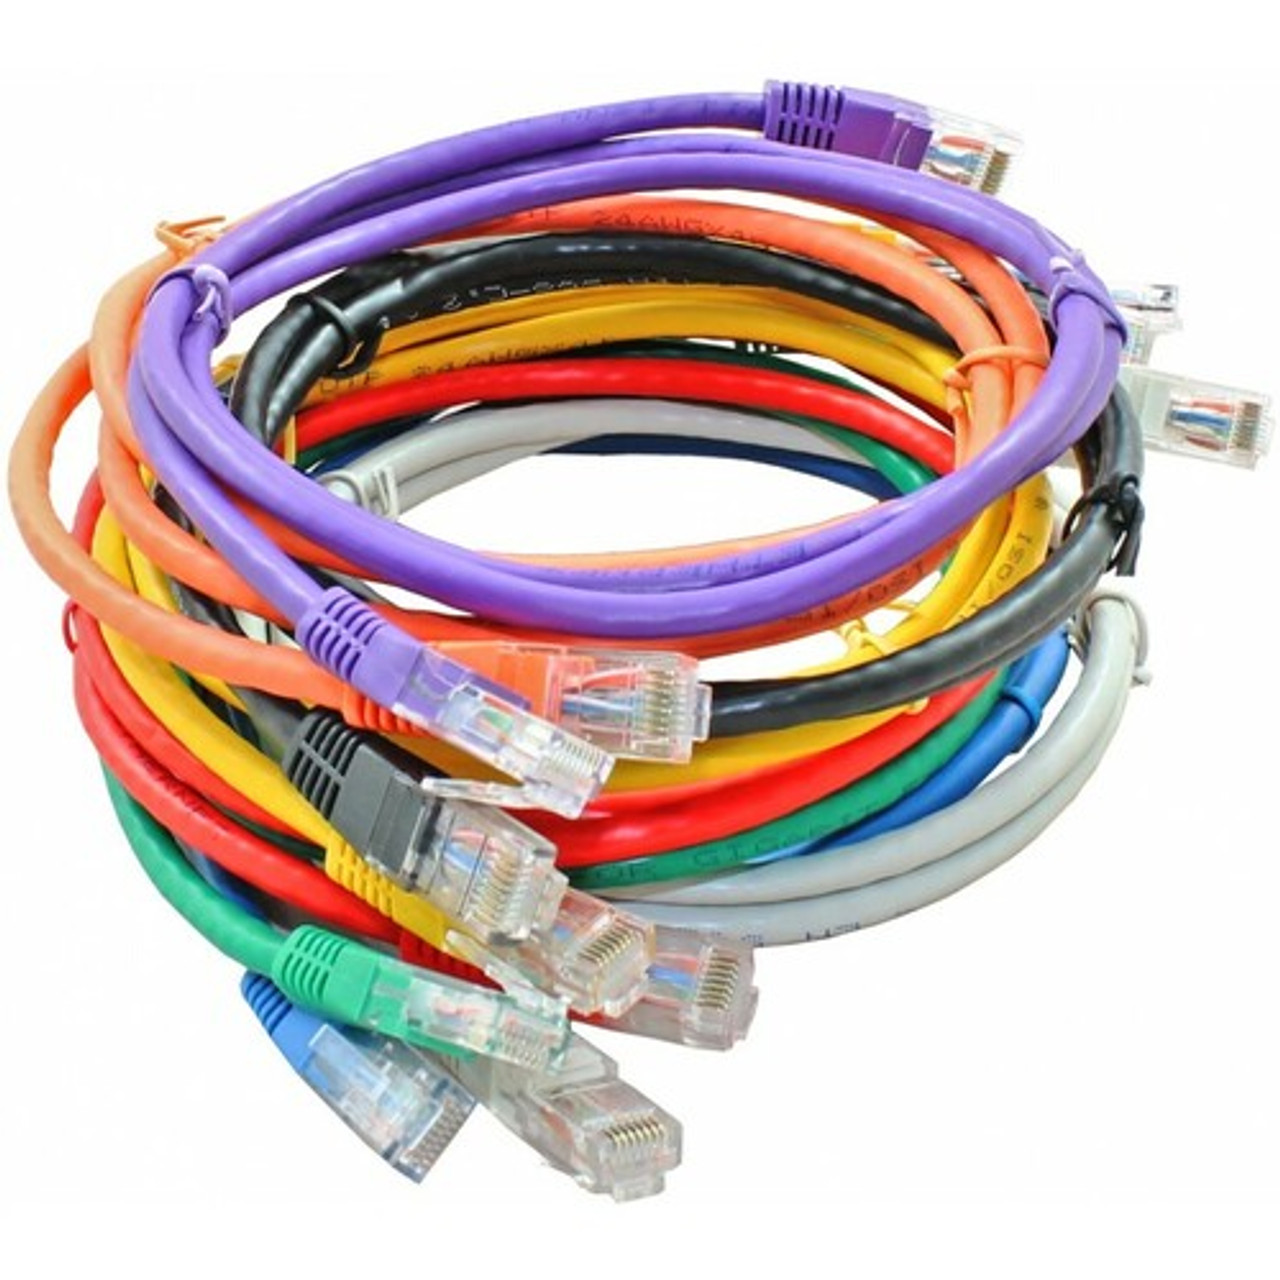 7 ft. CAT6 Ethernet Cable - 10-Pack